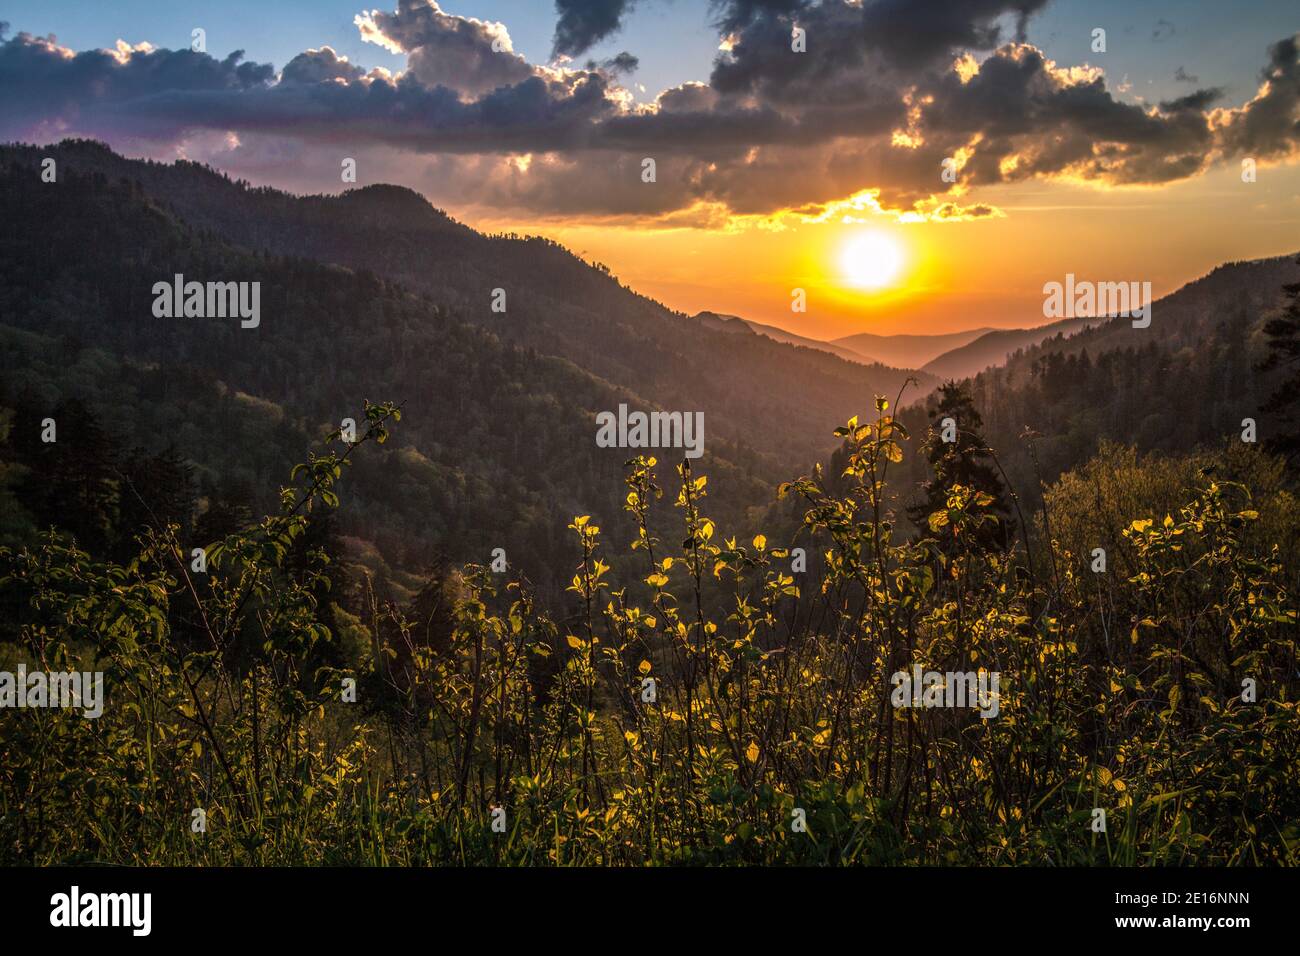 Great Smoky Mountain Sunset Landscape. Sunset from a Blue Ridge Parkway overlook with the Great Smoky Mountains at the horizon. Stock Photo